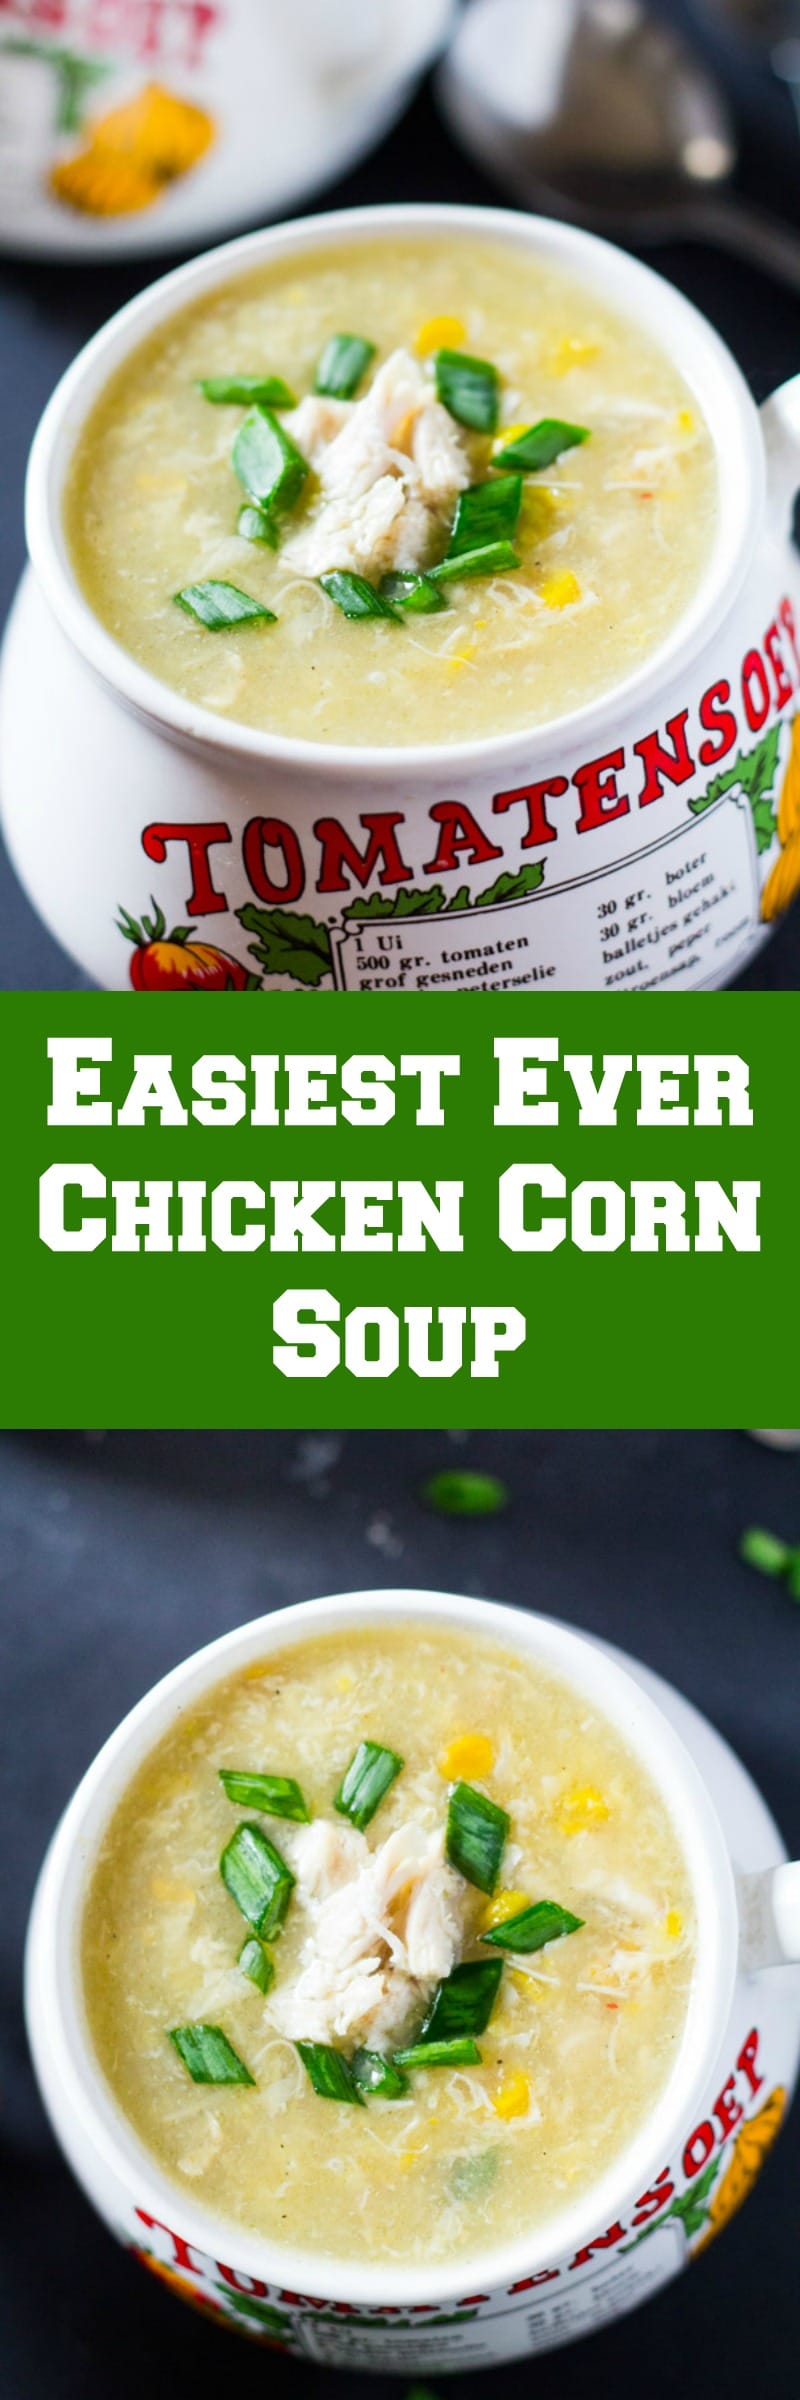 How to Make Chicken Corn Soup